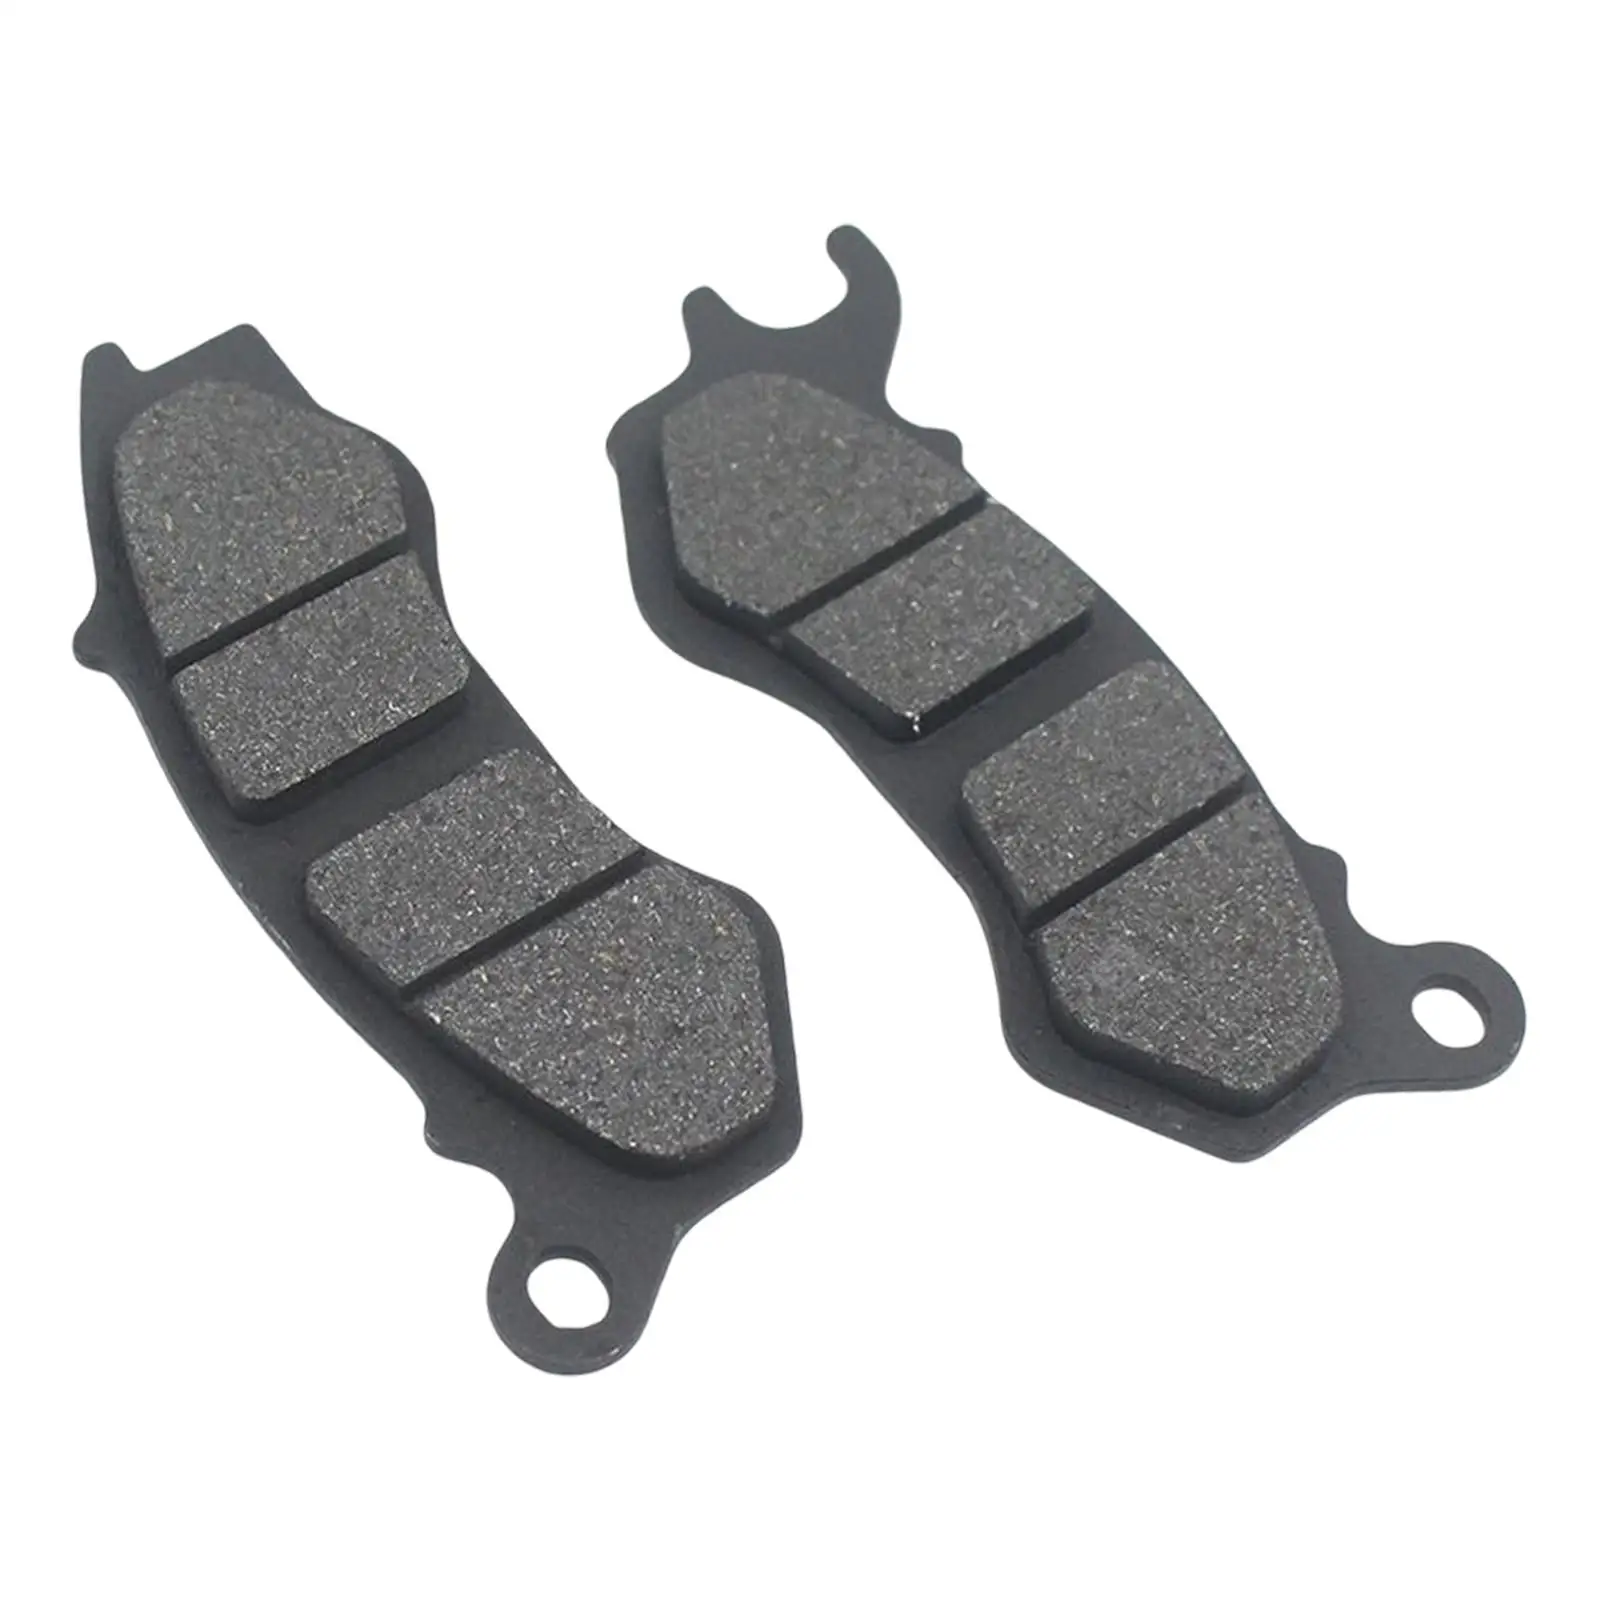 Front Brake Pads for Honda PCX 125 150 - High-Quality Wood Material, Easy Inst - $20.61